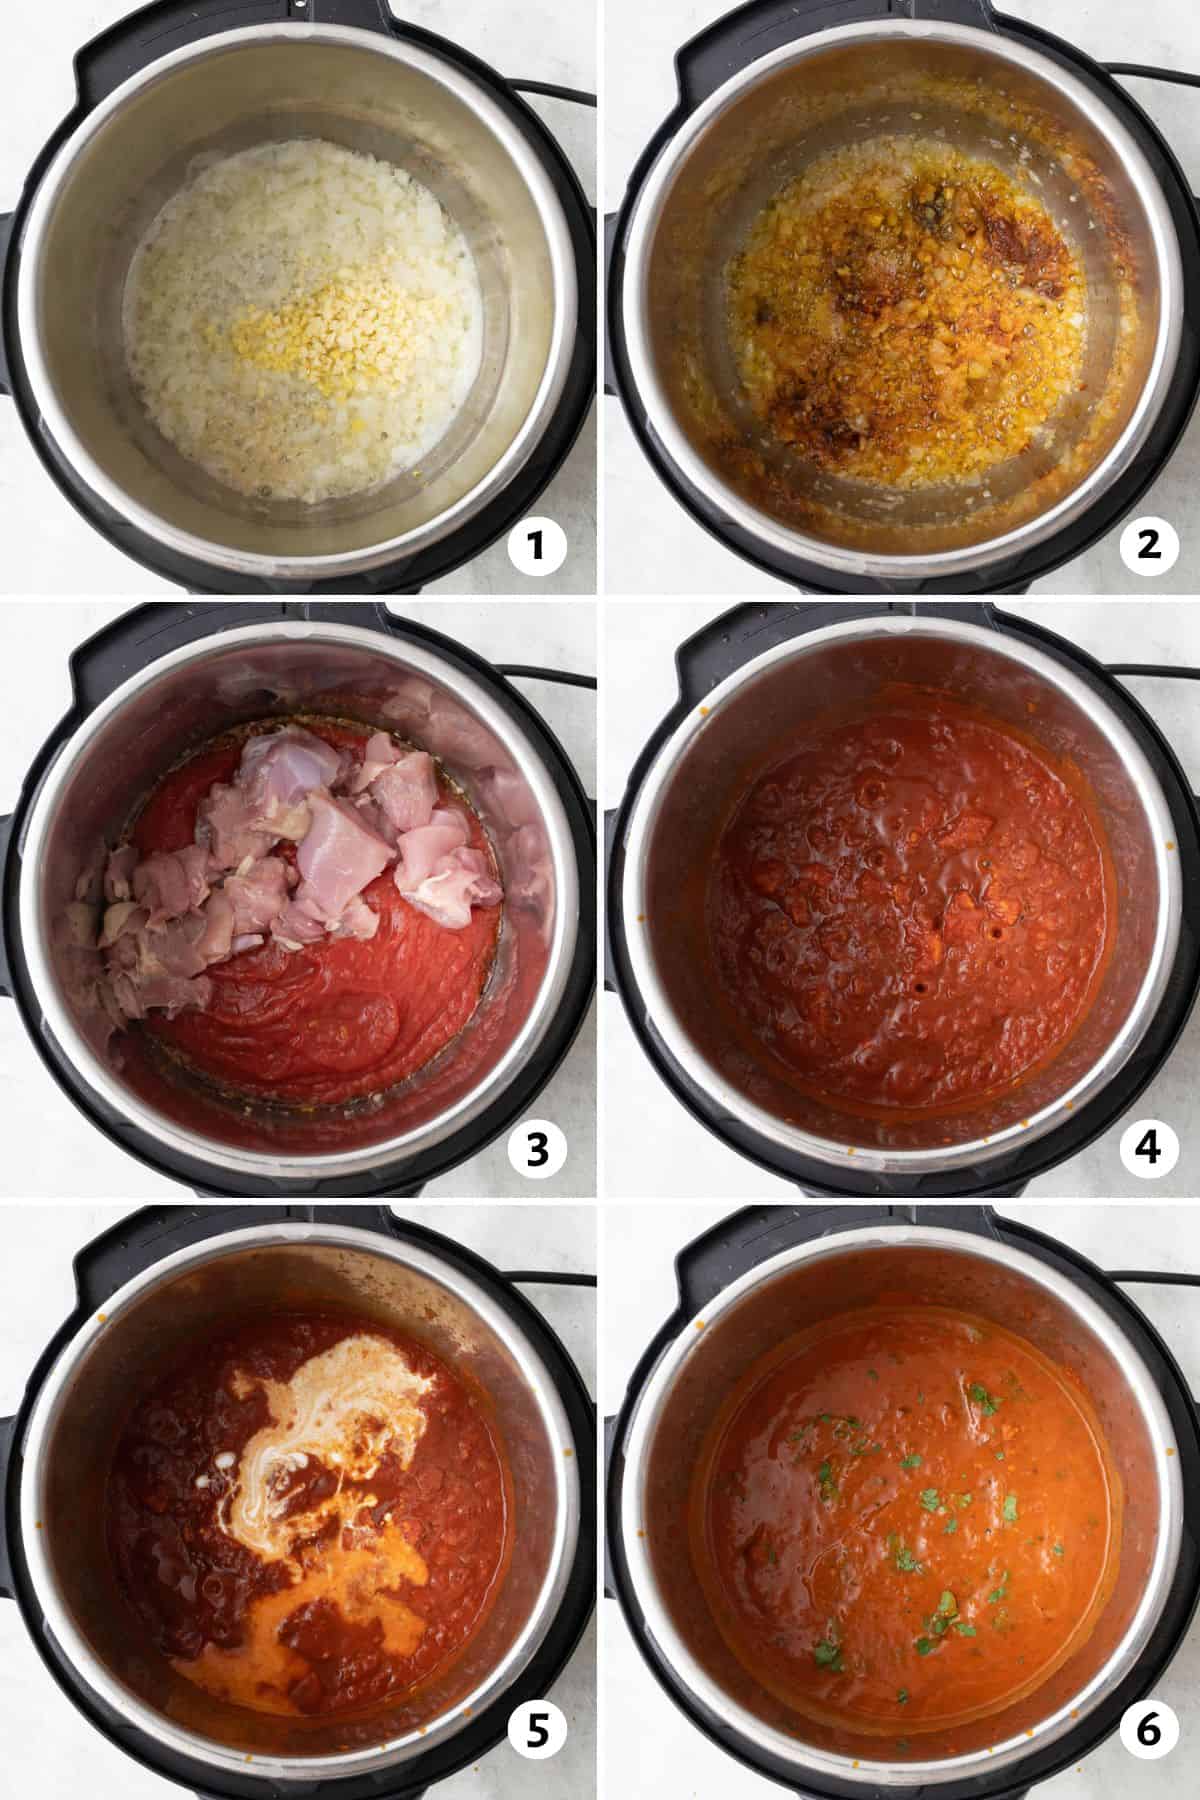 6 image collage making recipe in an Instant pot: 1- melted butter, onion, garlic, and ginger before sauteing, 2- after cooking to show browned veggies with turmeric, cumin, paprika, and salt added, 3- after combining/cooking with chicken and crushed tomatoes added, 4-after cooking, 5- coconut milk and slurry added, 6- after stirring with garam masala and cilantro on top.